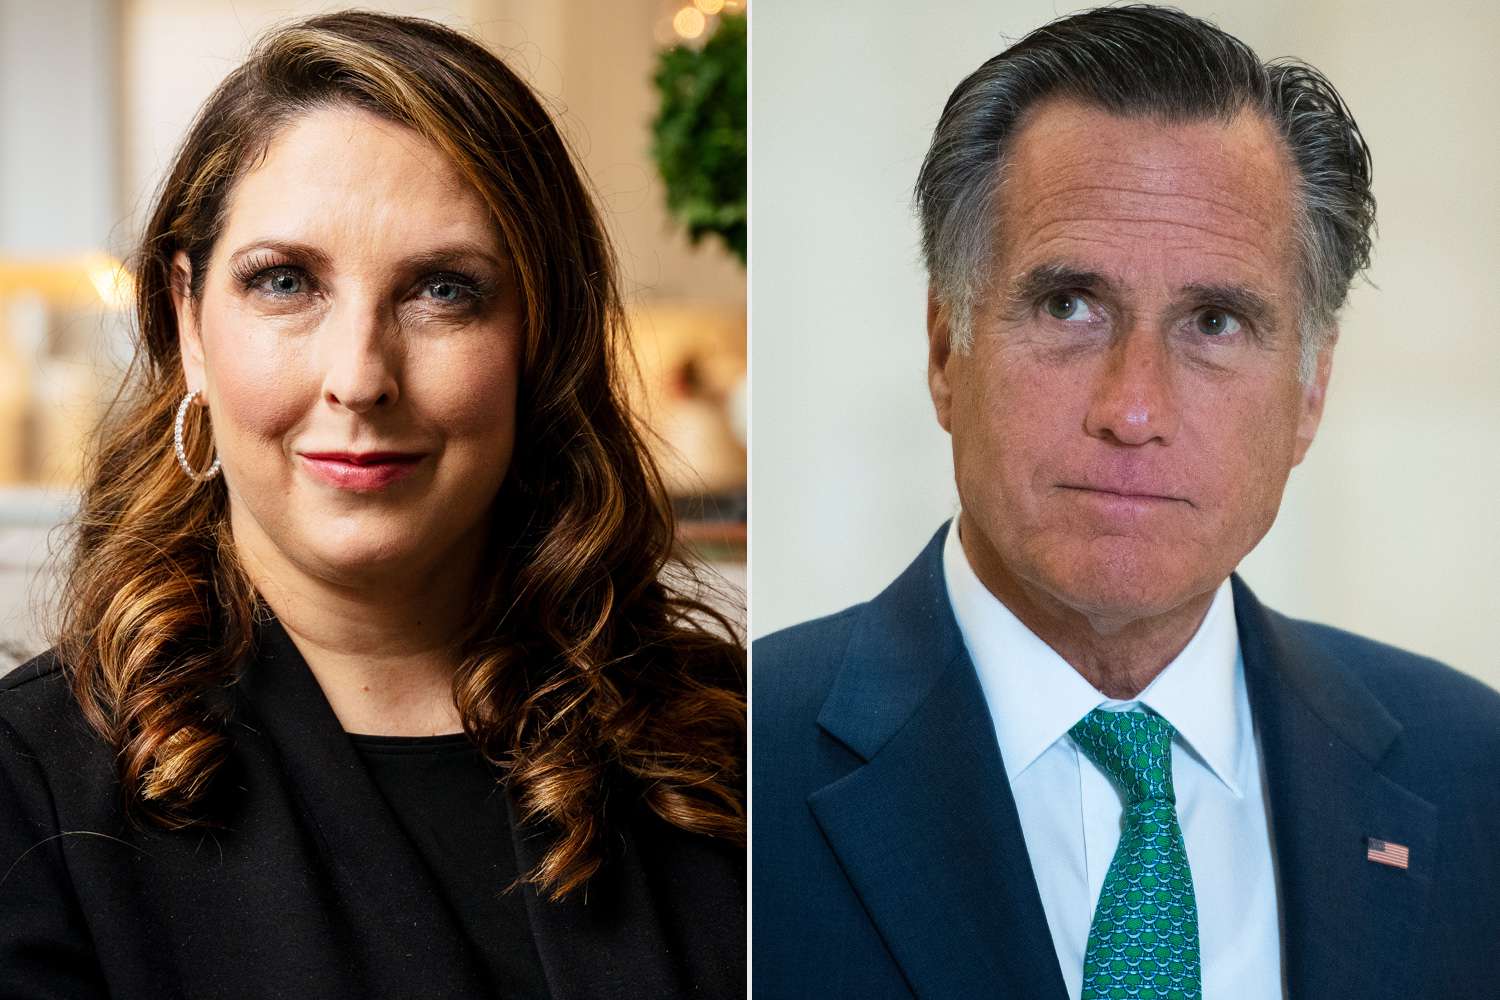 Is Ronna McDaniel related to Mitt Romney? Understanding the family ties amid political differences